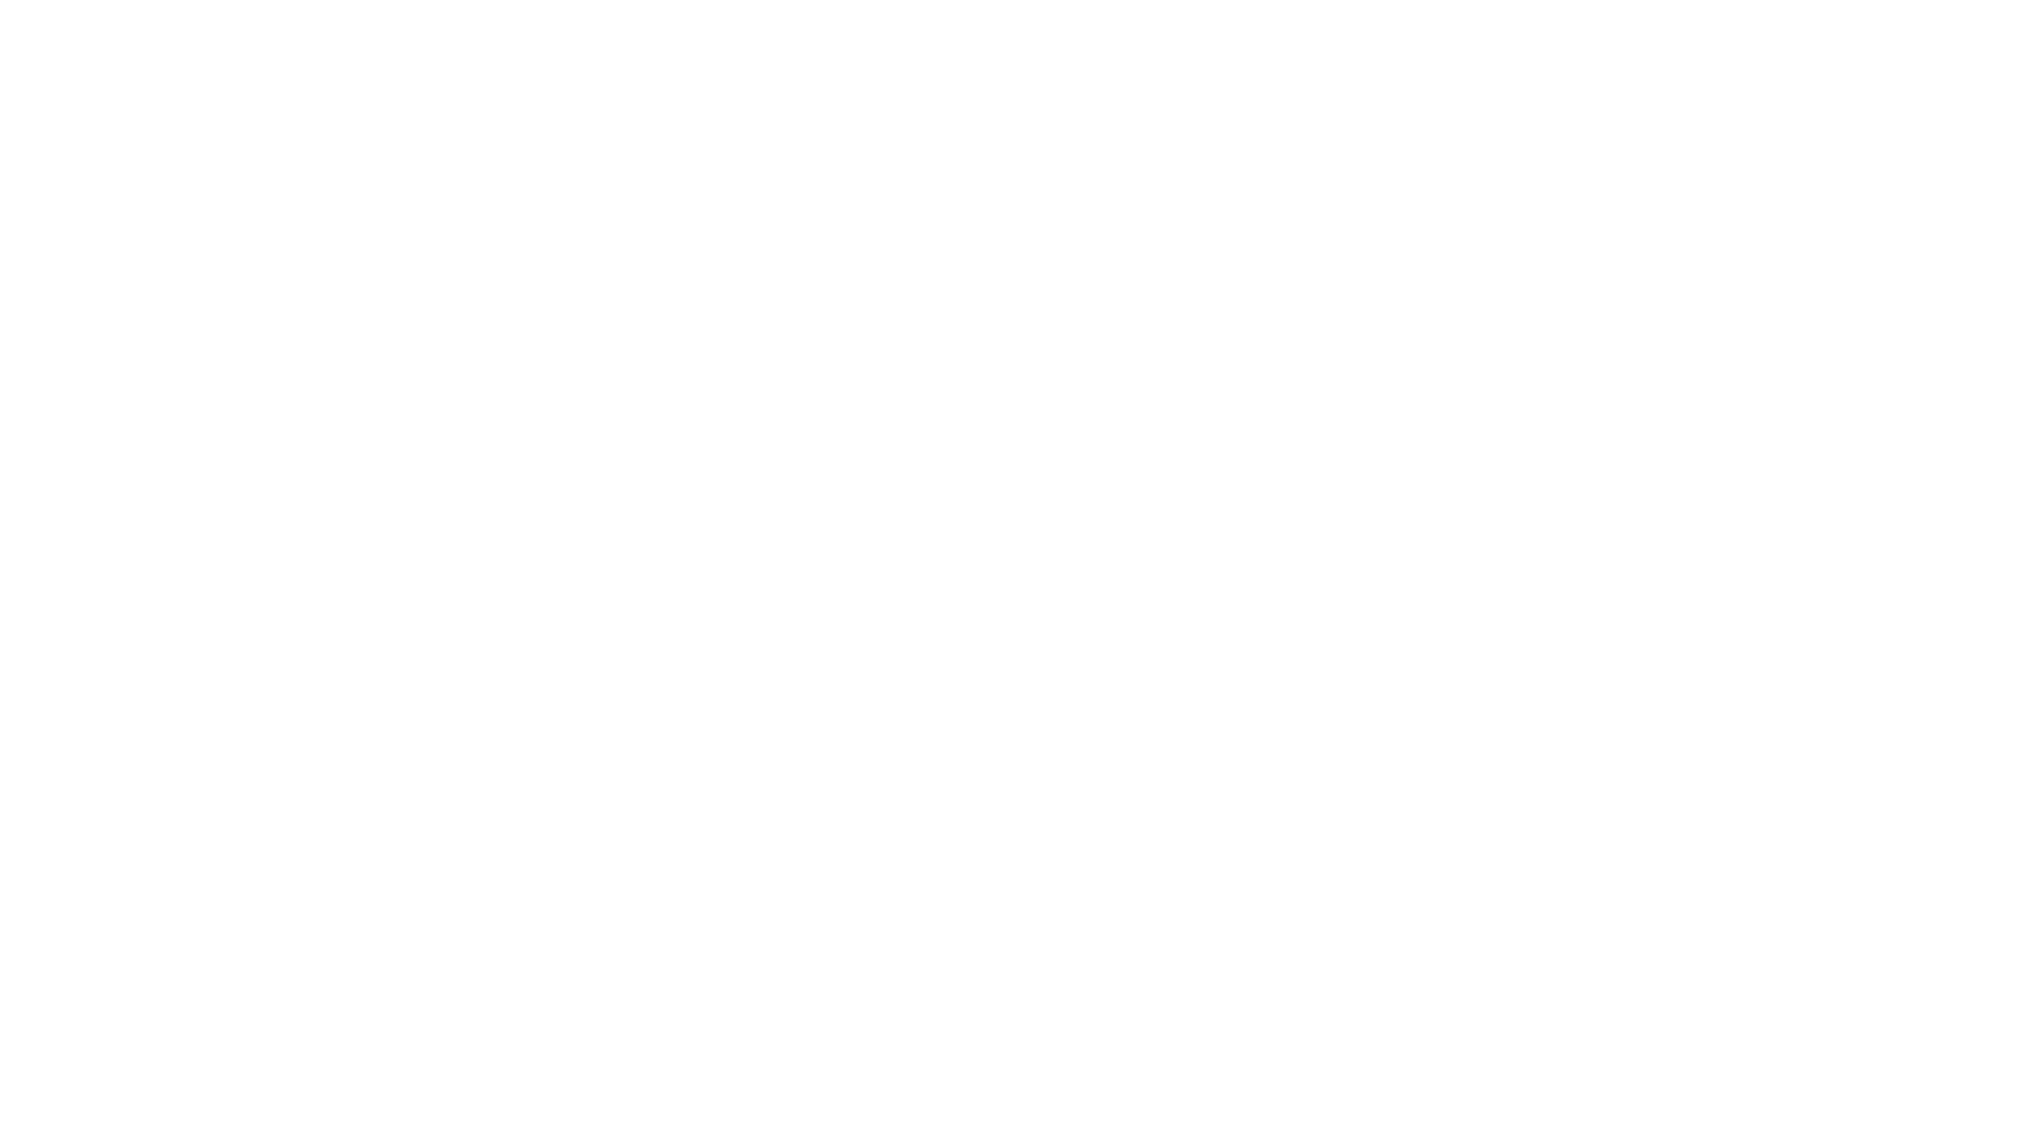 People's Awards